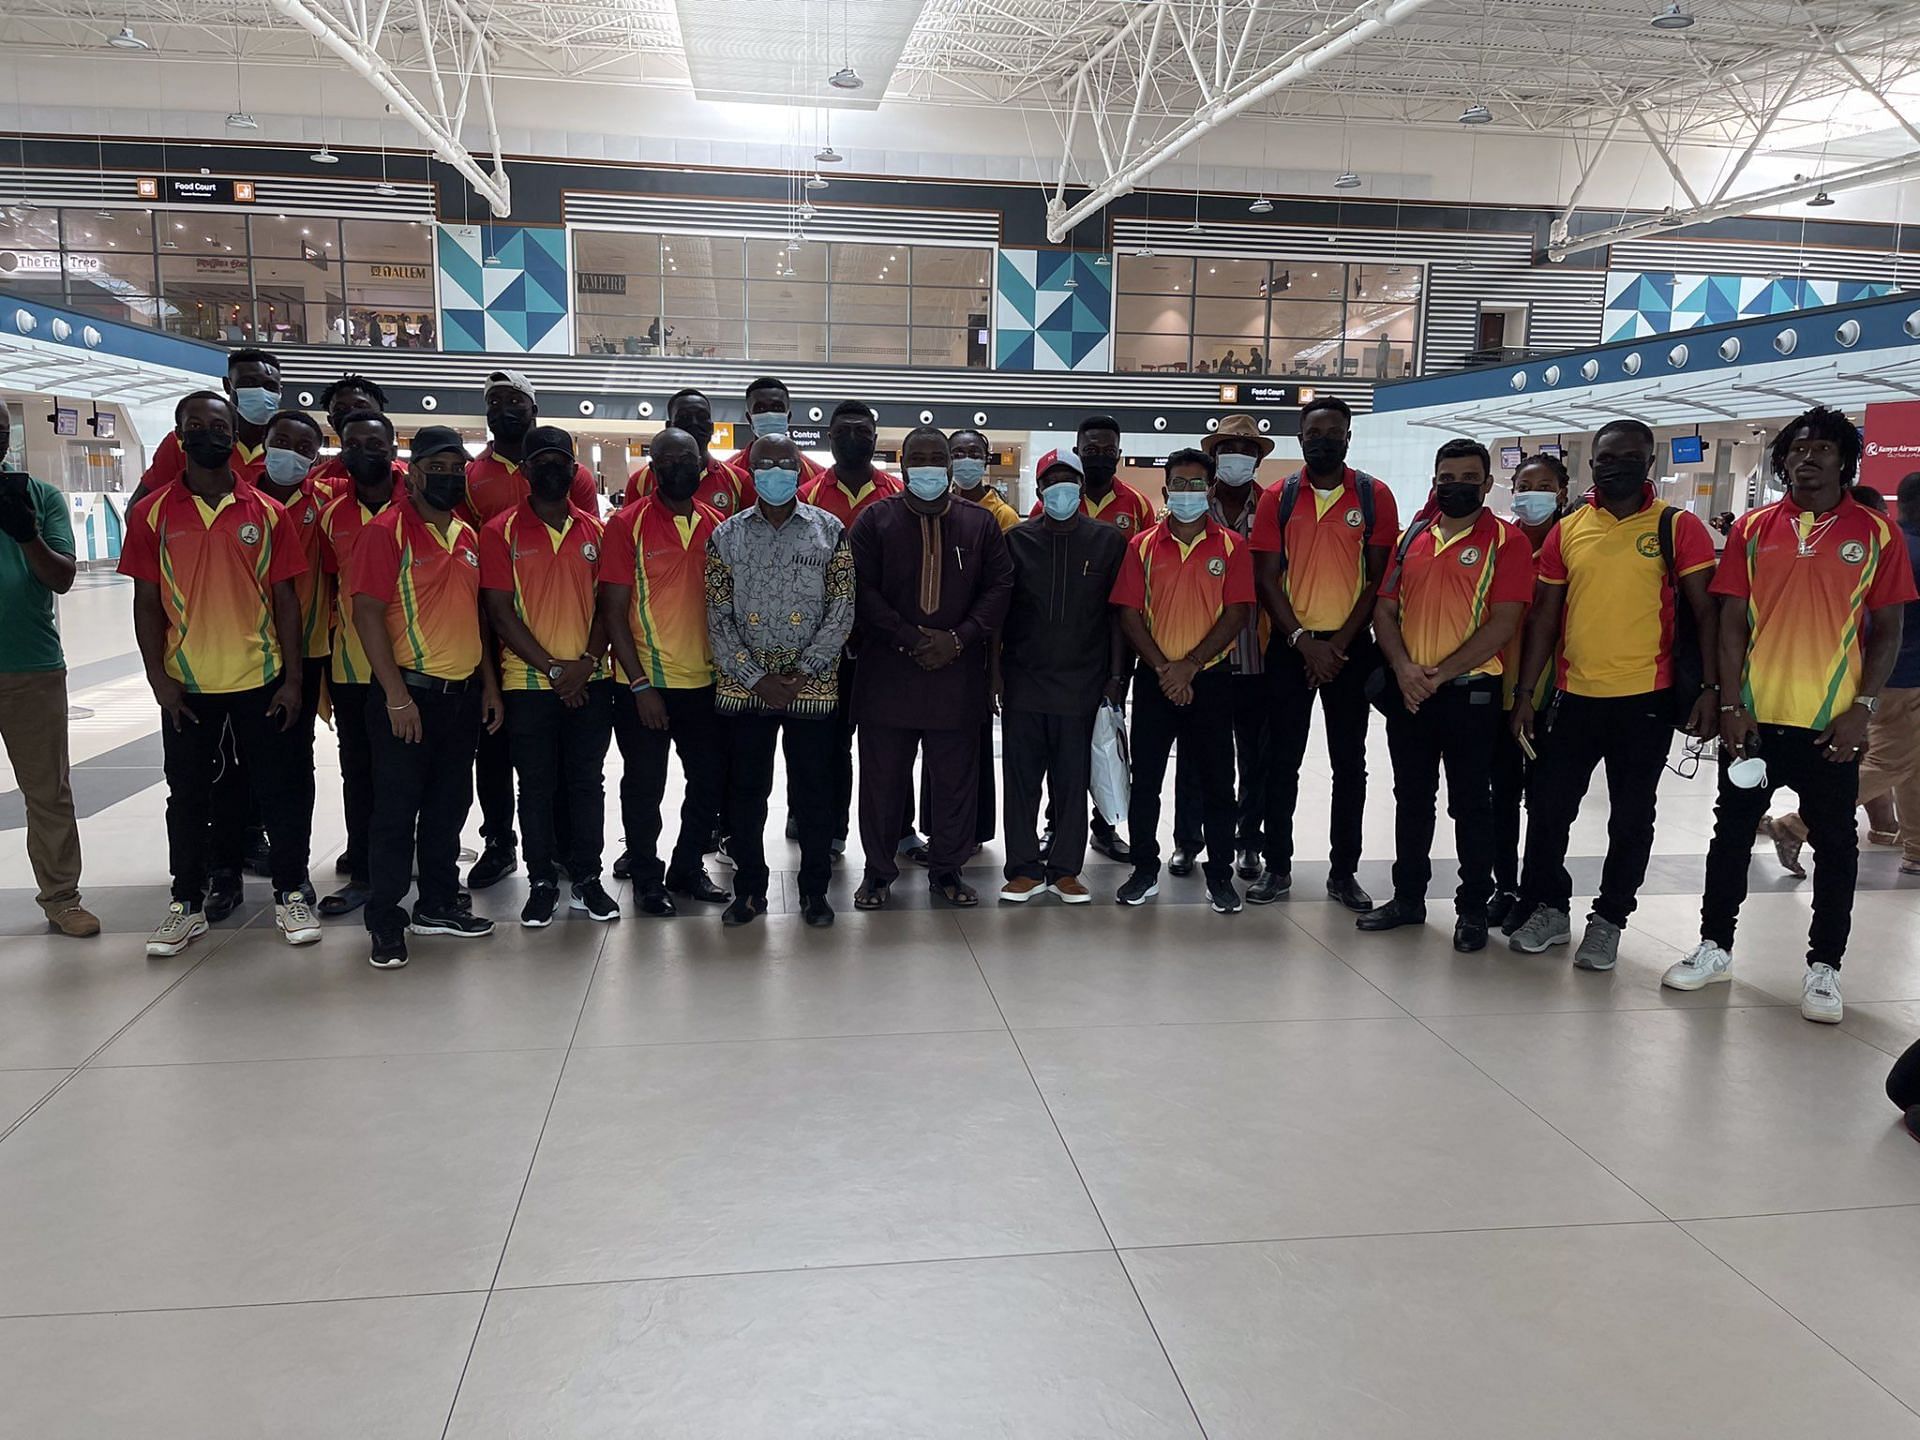 The Ghana side makes their way to Rwanda for this tournament. (Image Courtesy: Twitter)